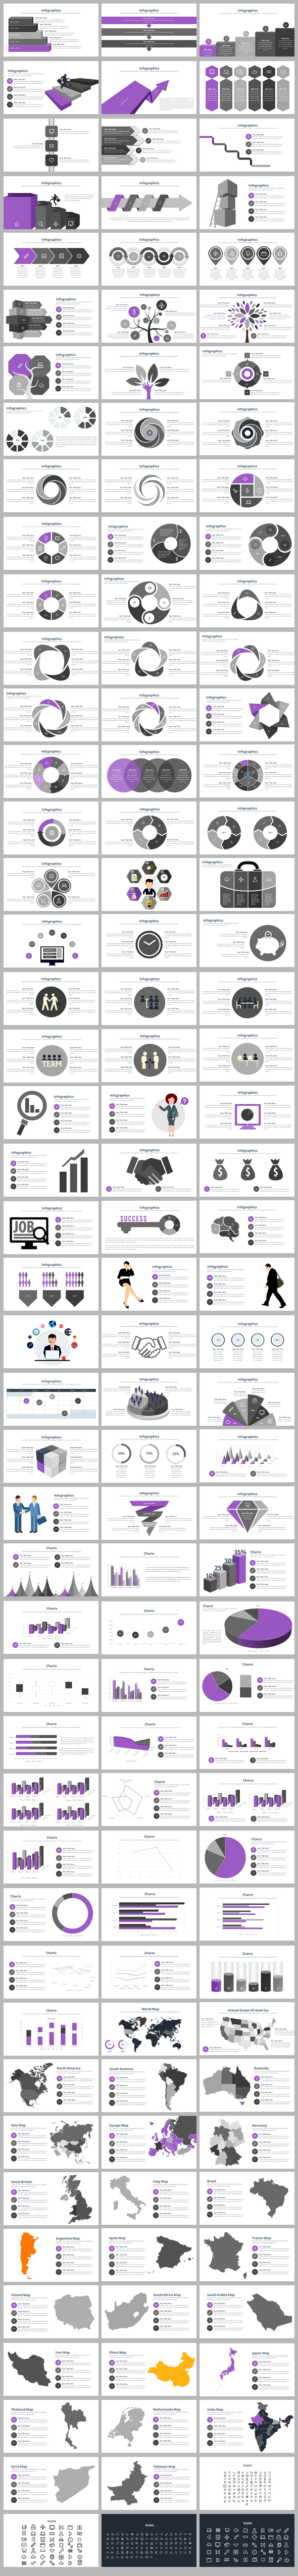 Business Strategy Powerpoint Templates Bundle - 6